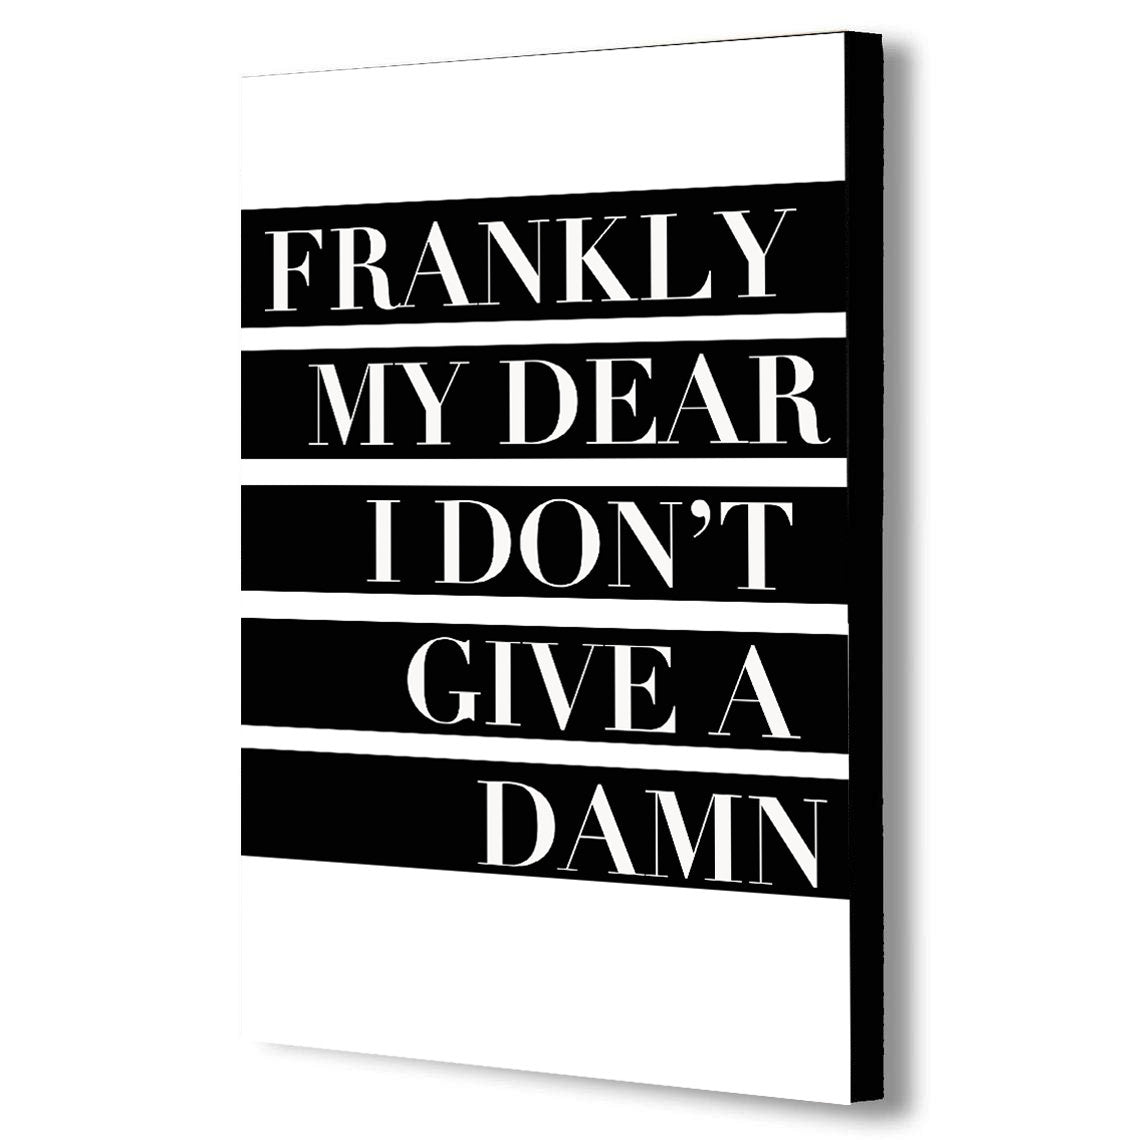 Frankly My Dear I Don't Give A Damn - Gone With The Wind  - Movie Quotes - Canvas Wall Art Framed Print - Various Sizes